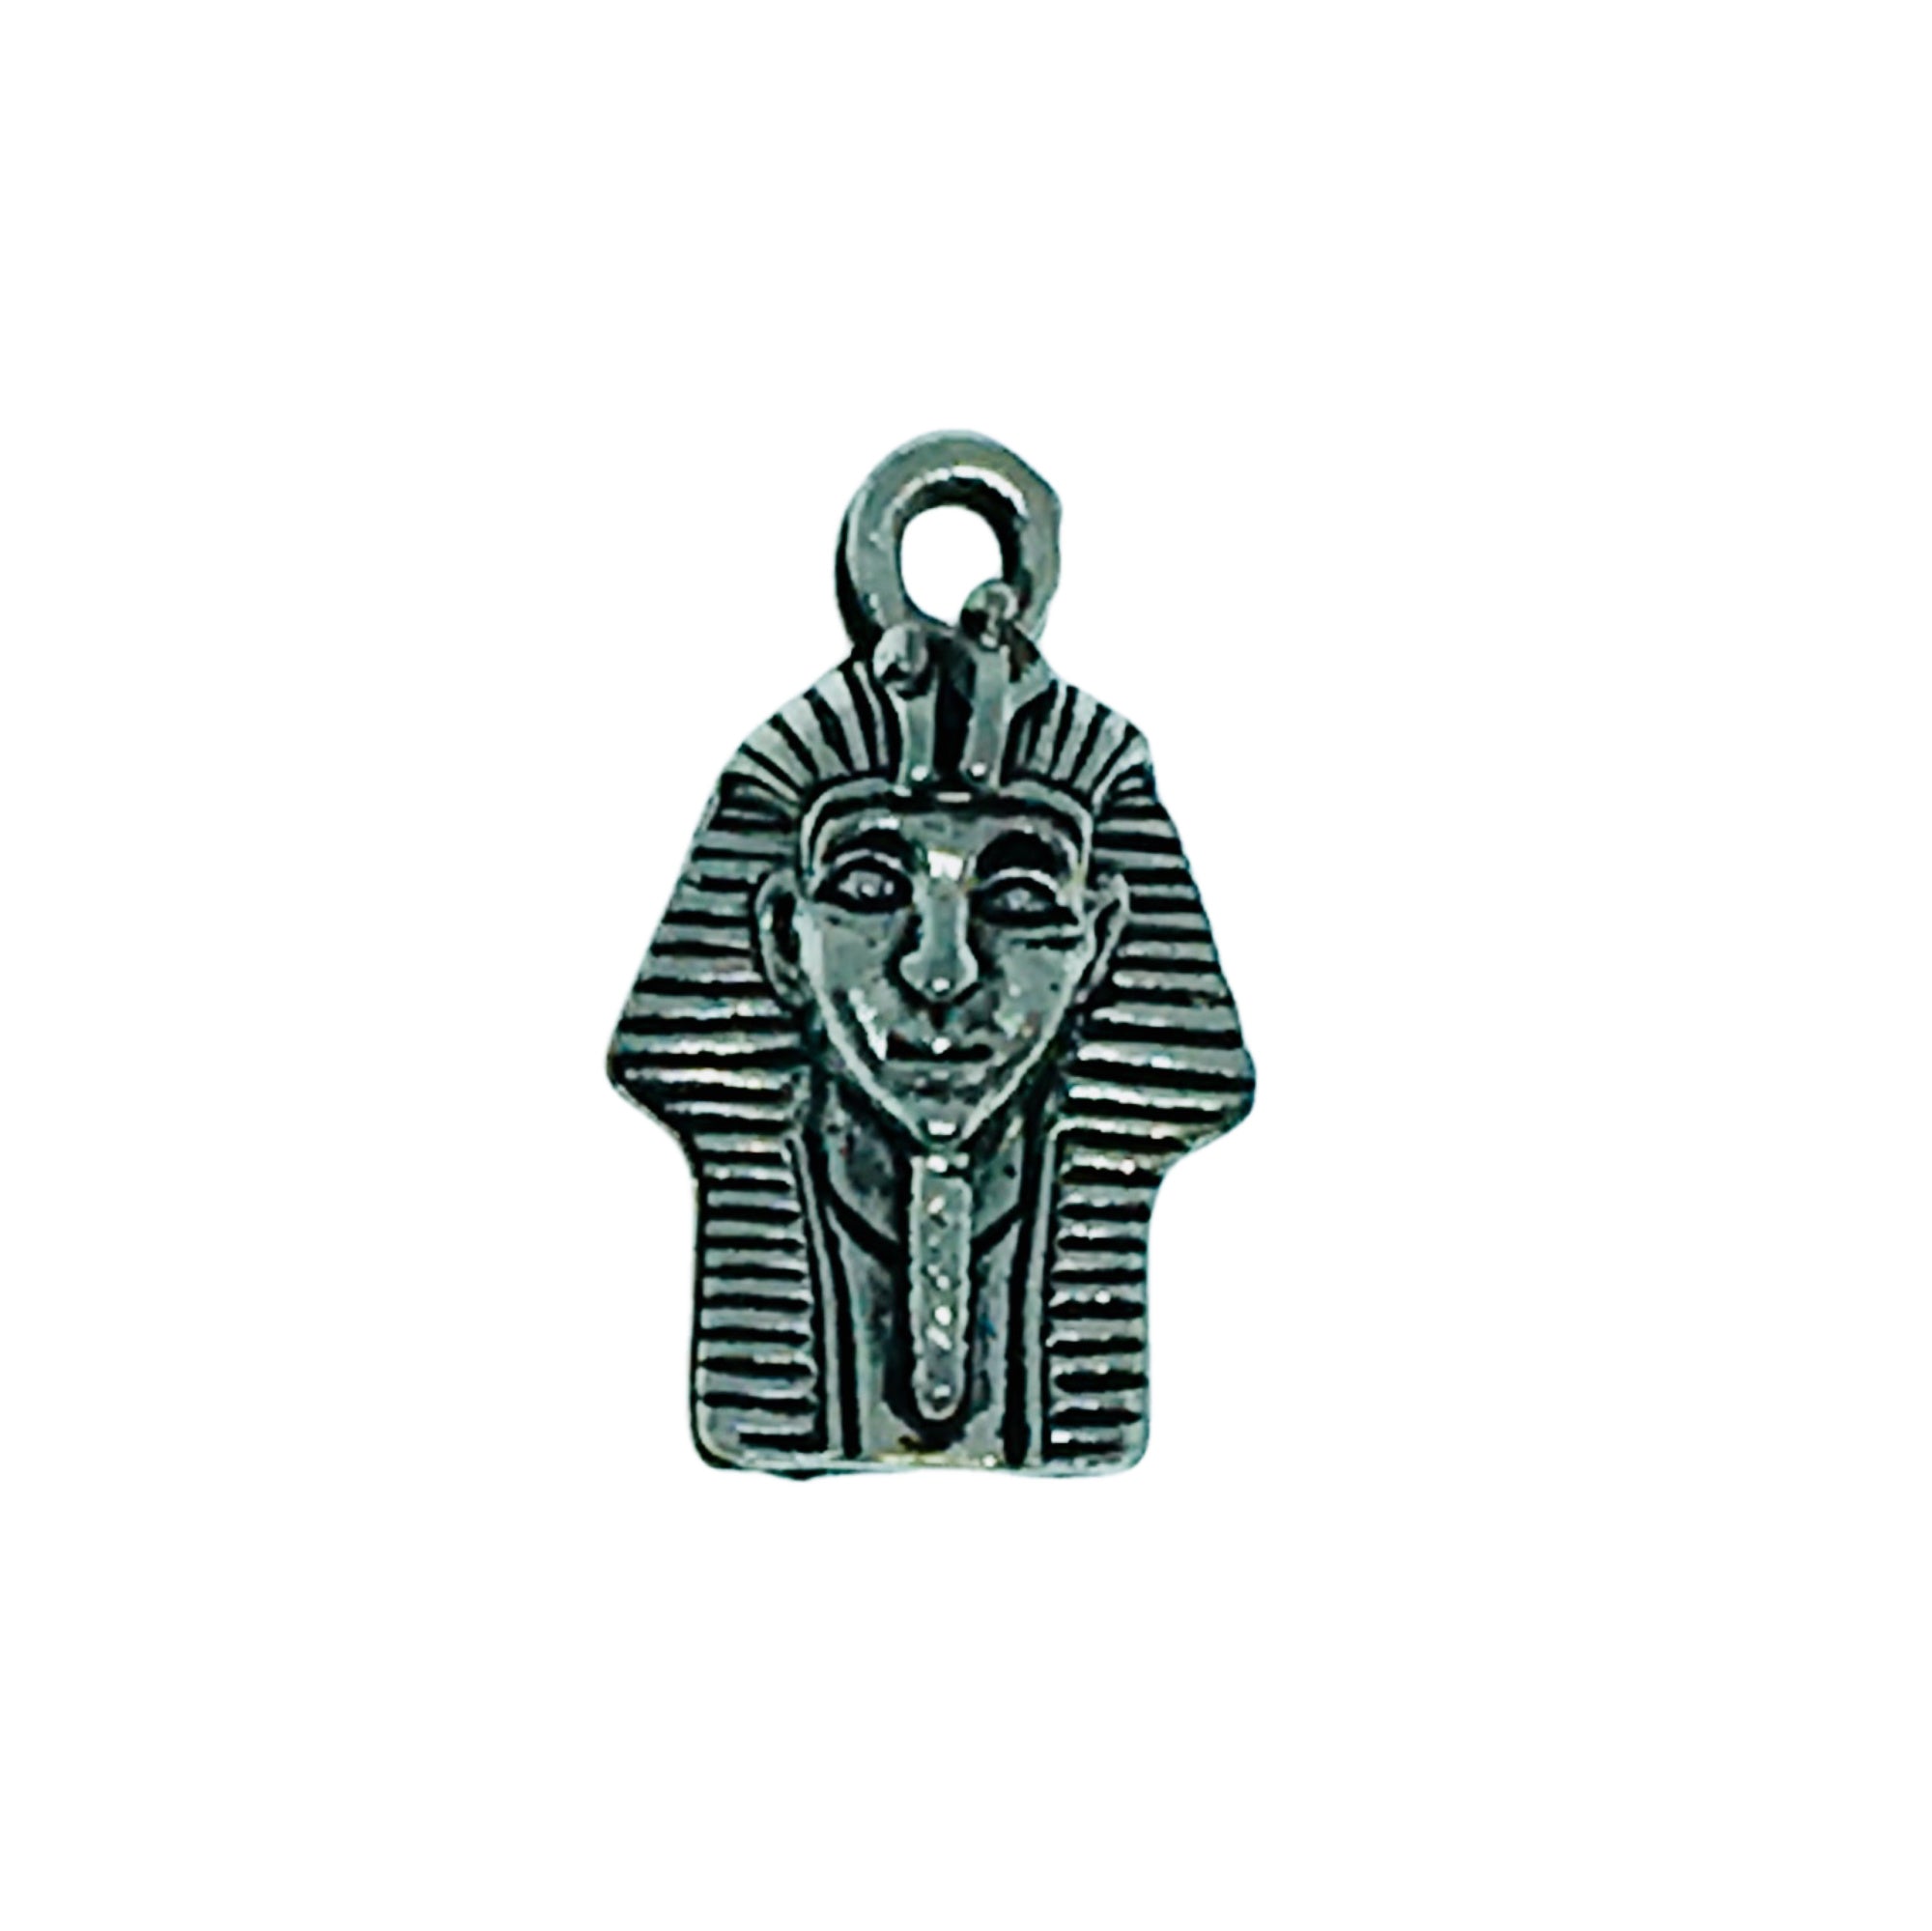 Pharaoh Head Charms - Qty of 5 Charms - Lead Free Pewter Silver - American Made